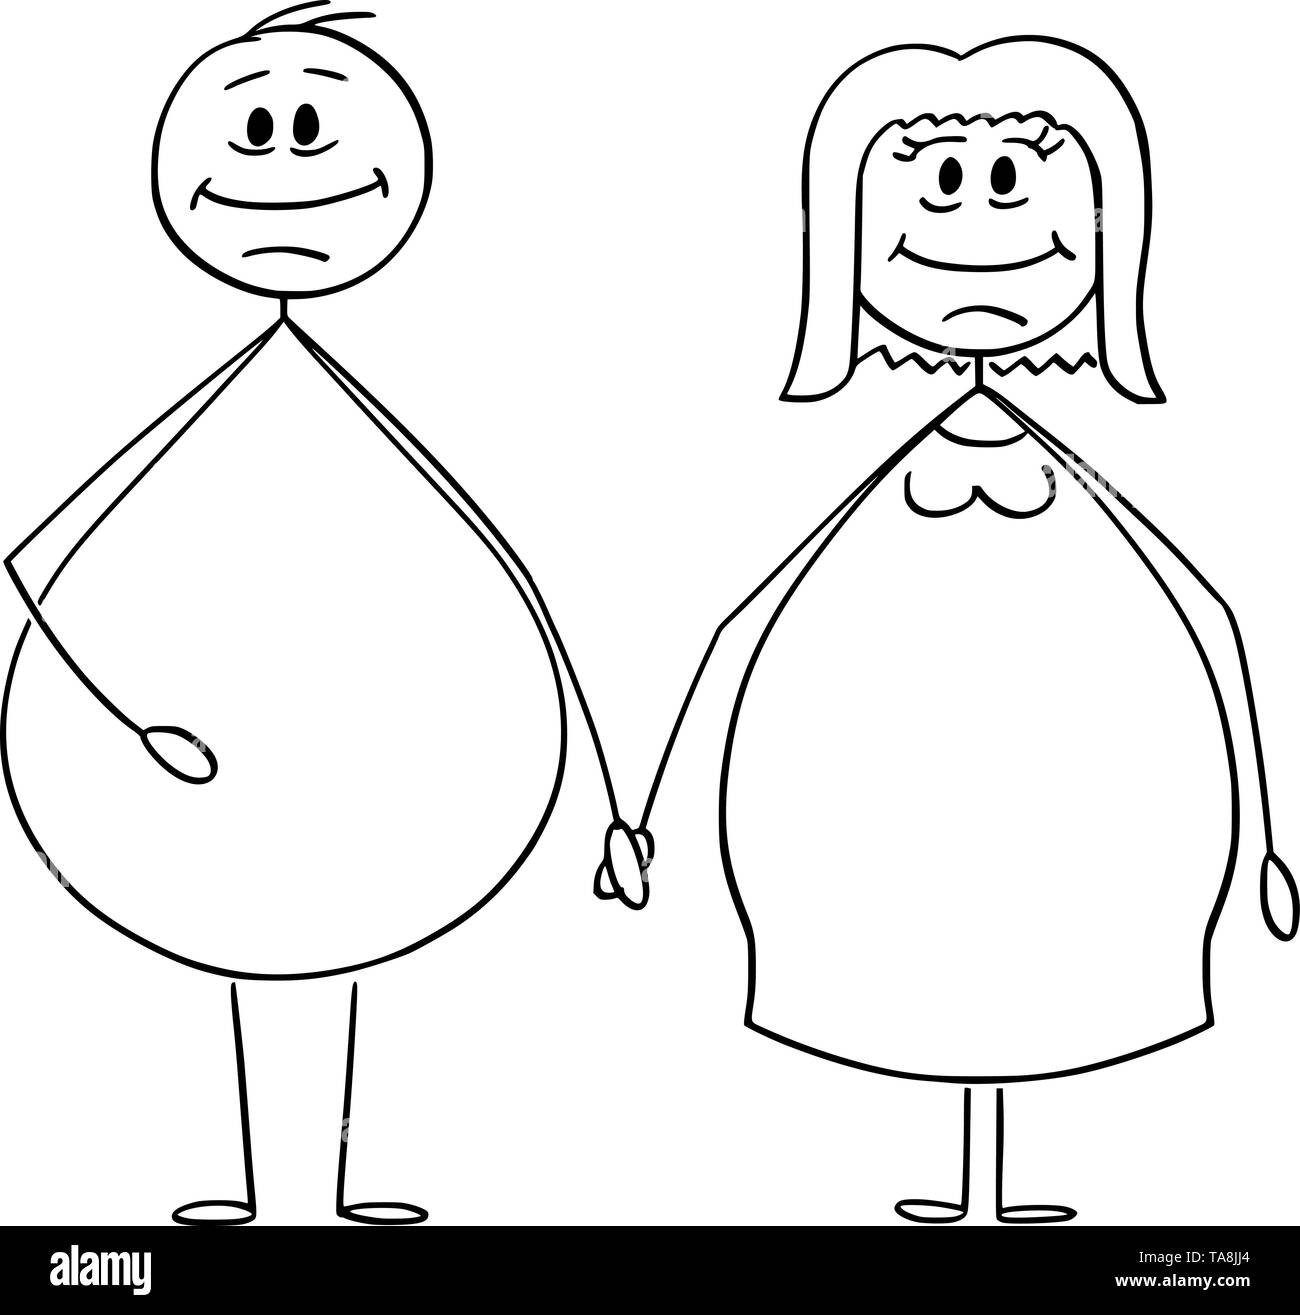 Vector cartoon stick figure drawing conceptual illustration of overweight or obese heterosexual couple of man and woman holding hands. Stock Vector